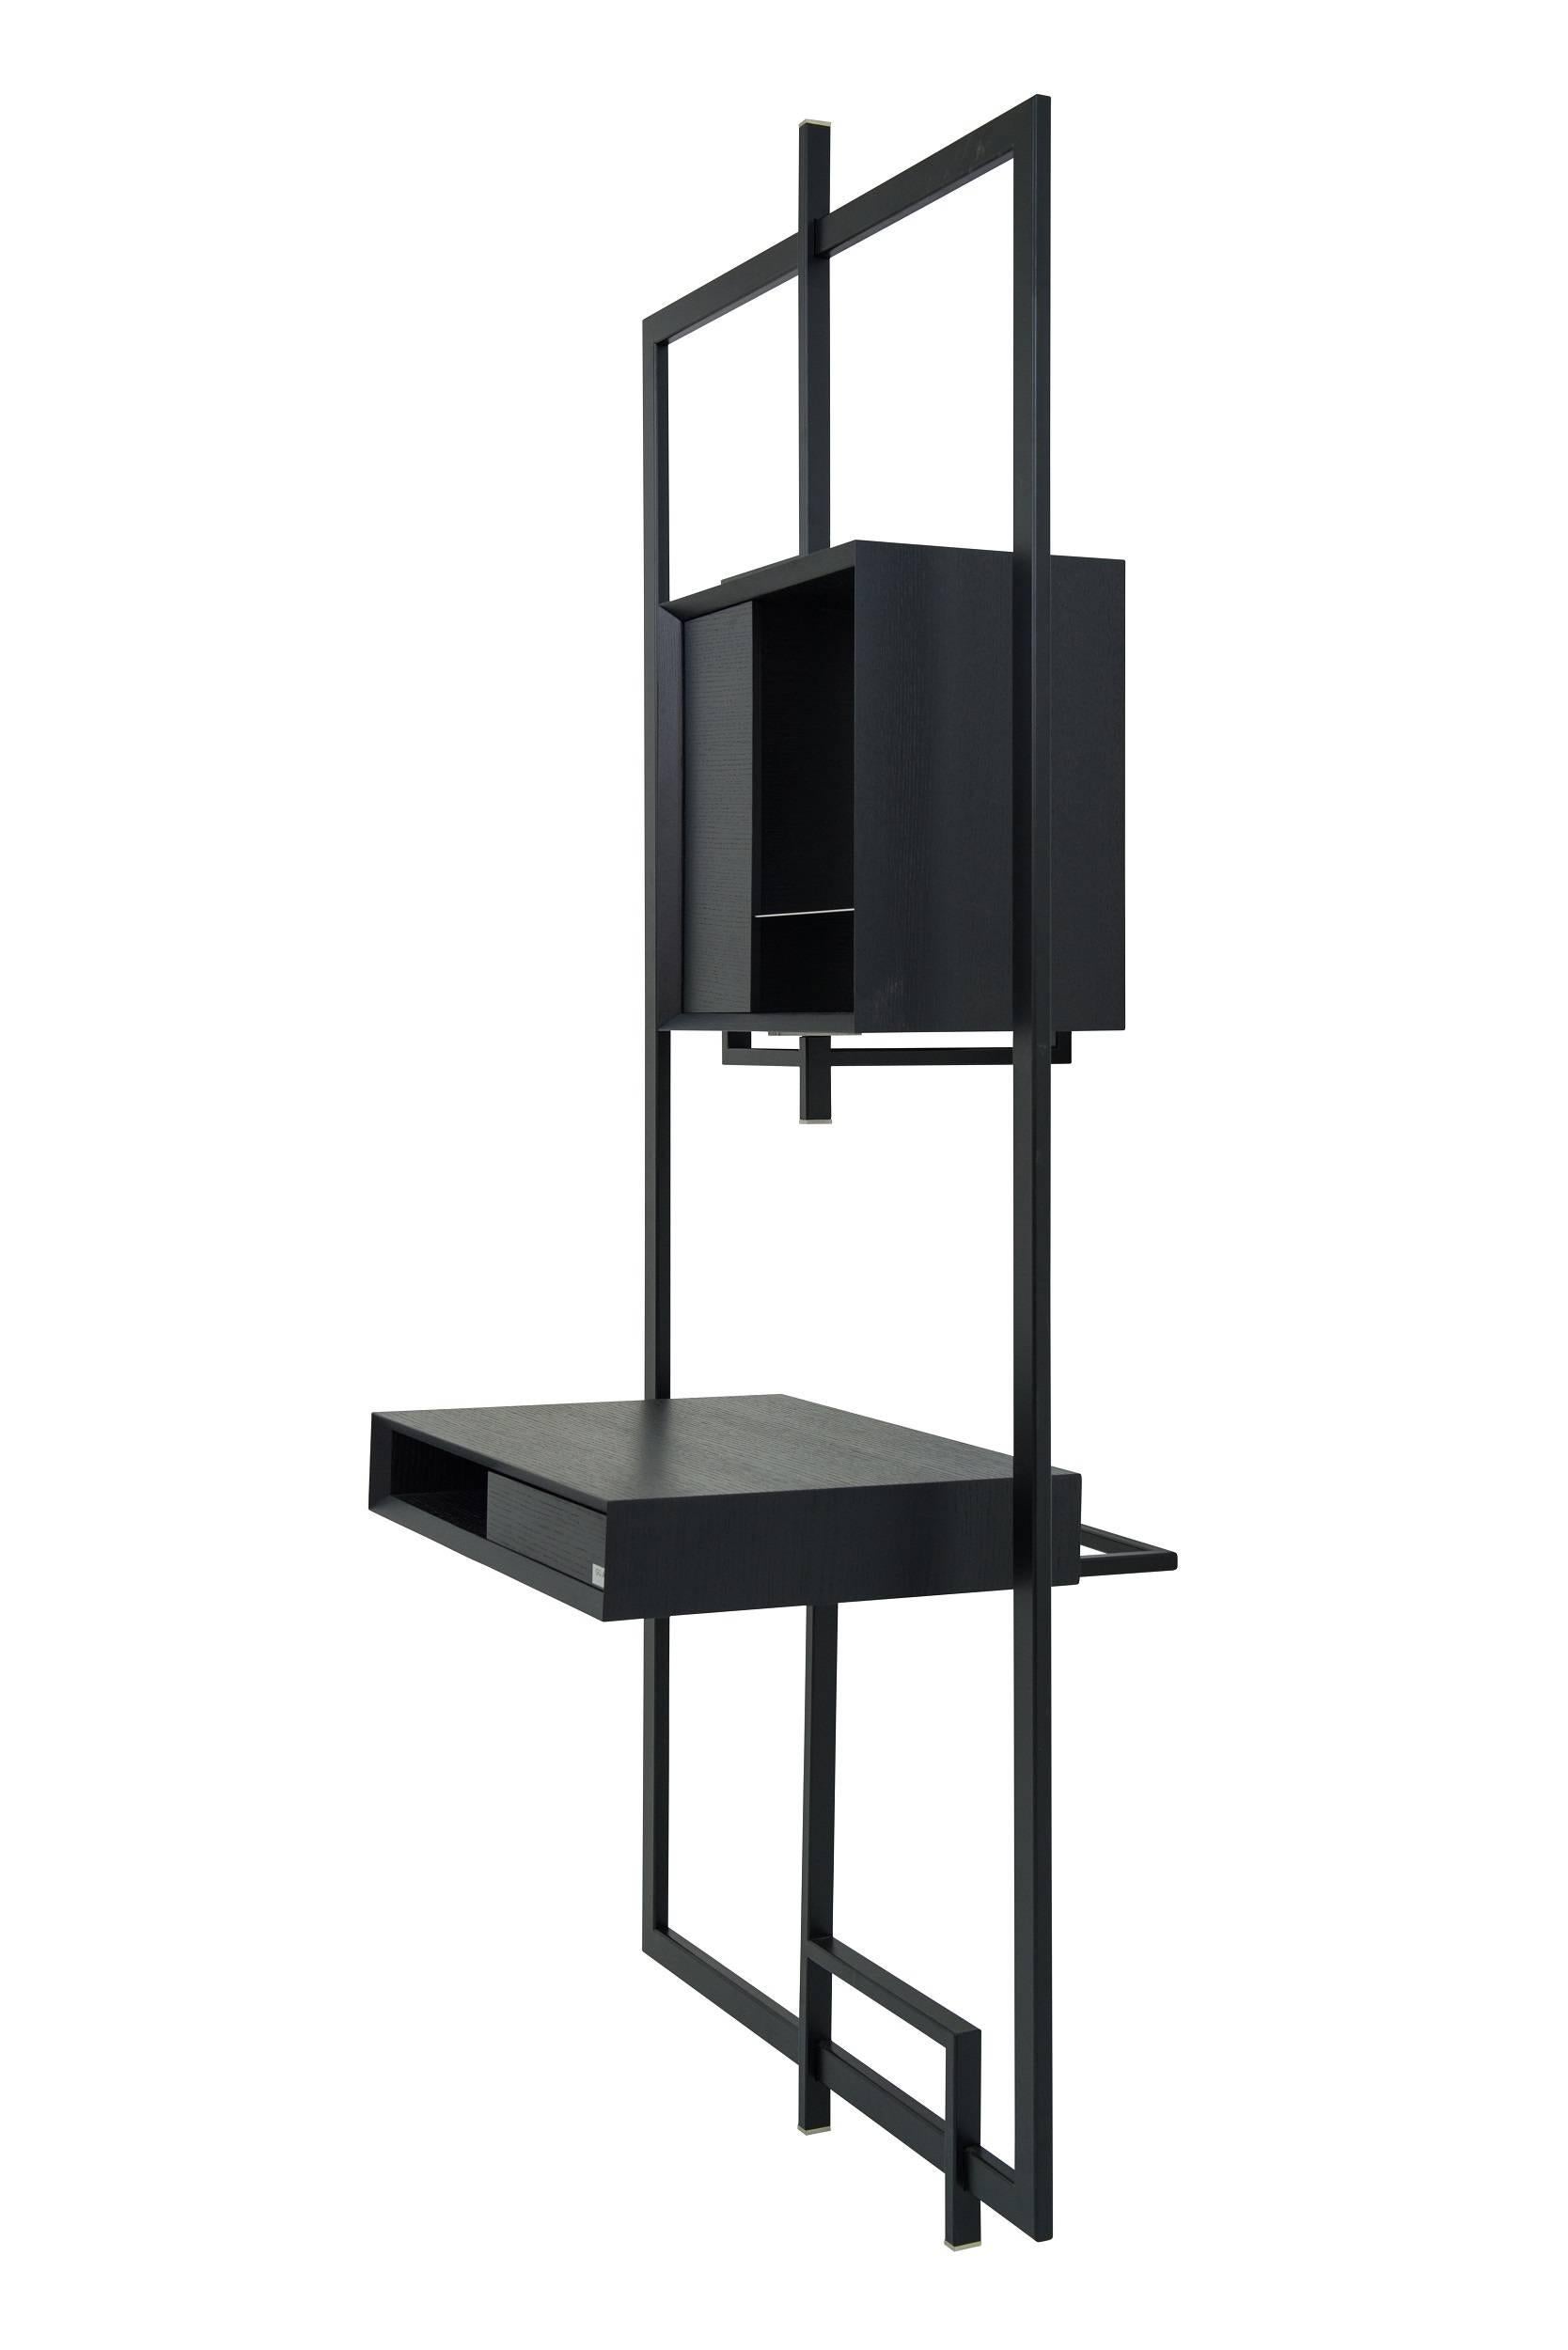 COM:POS:ITION 0.9
A Minimalist constructivistically composition from cubic elements in a frame.
Asymmetric arranged but visual in balance.This bureau seems to be a graphic painting. A floating graphic sculpture in space.
Corpuses: Black stained oak